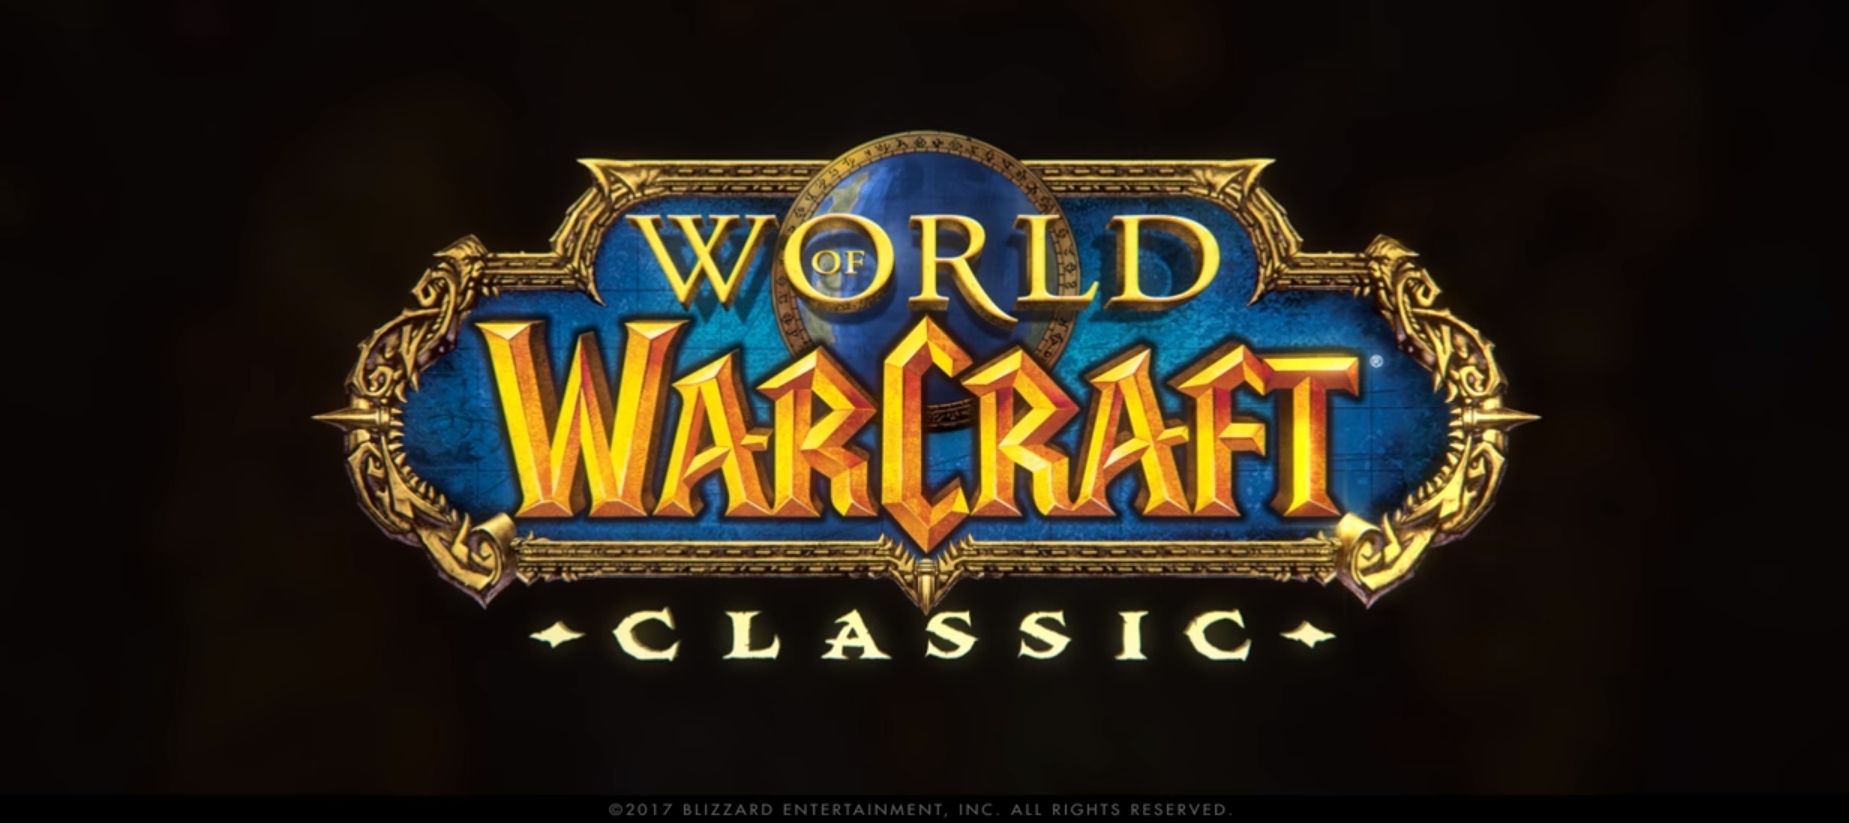 World Of Warcraft Classic Players Are Unsatisfied With The ‘NoChanges’ Honor Situation